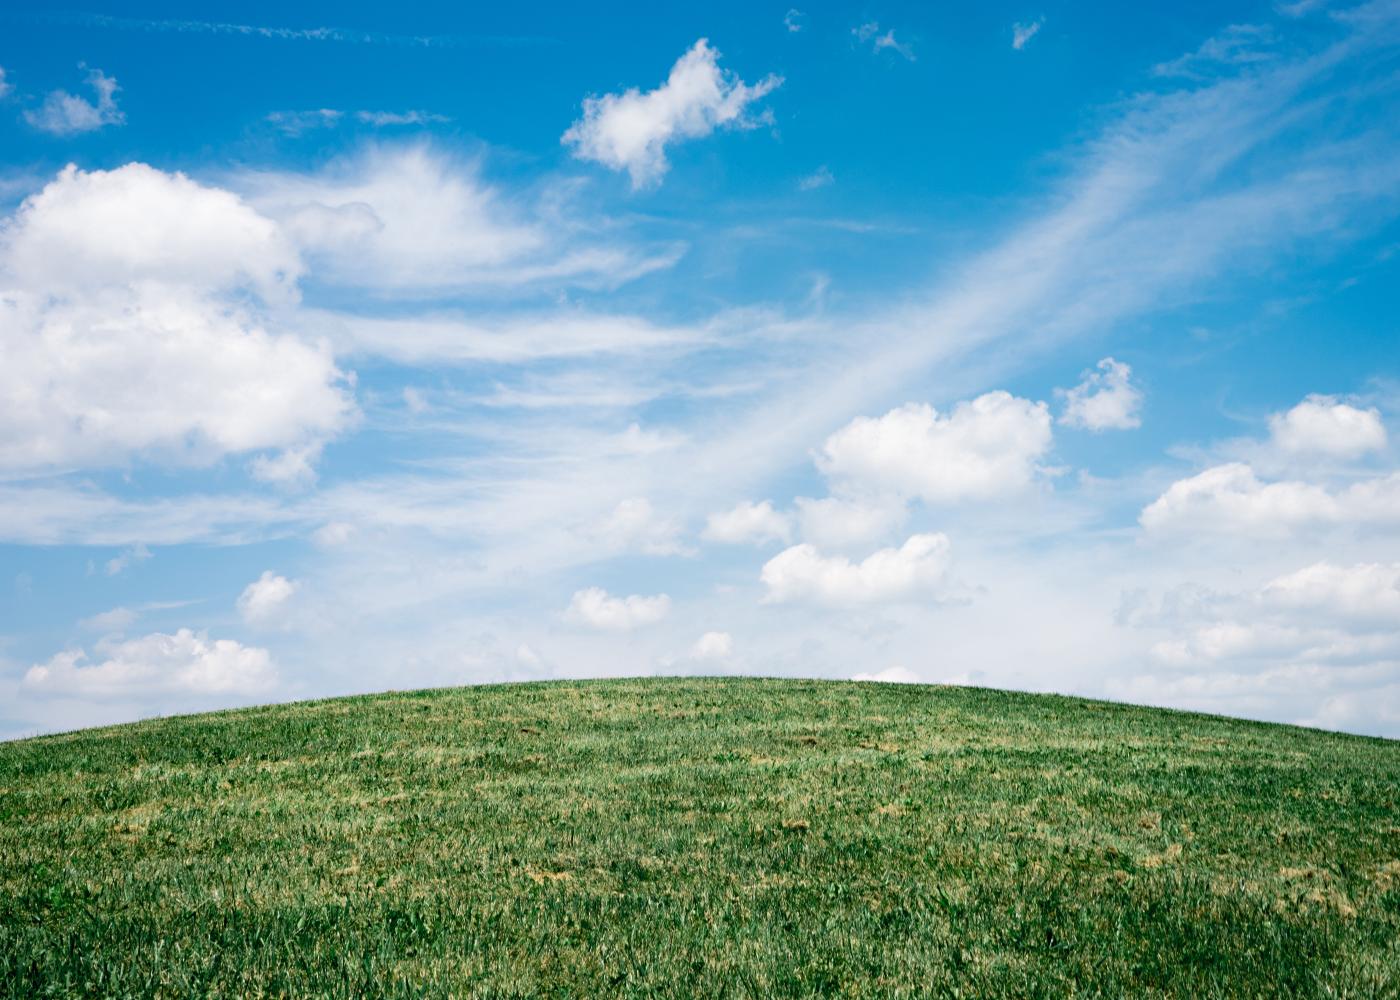 A grassy green knoll with slightly cloudy blue skies above.